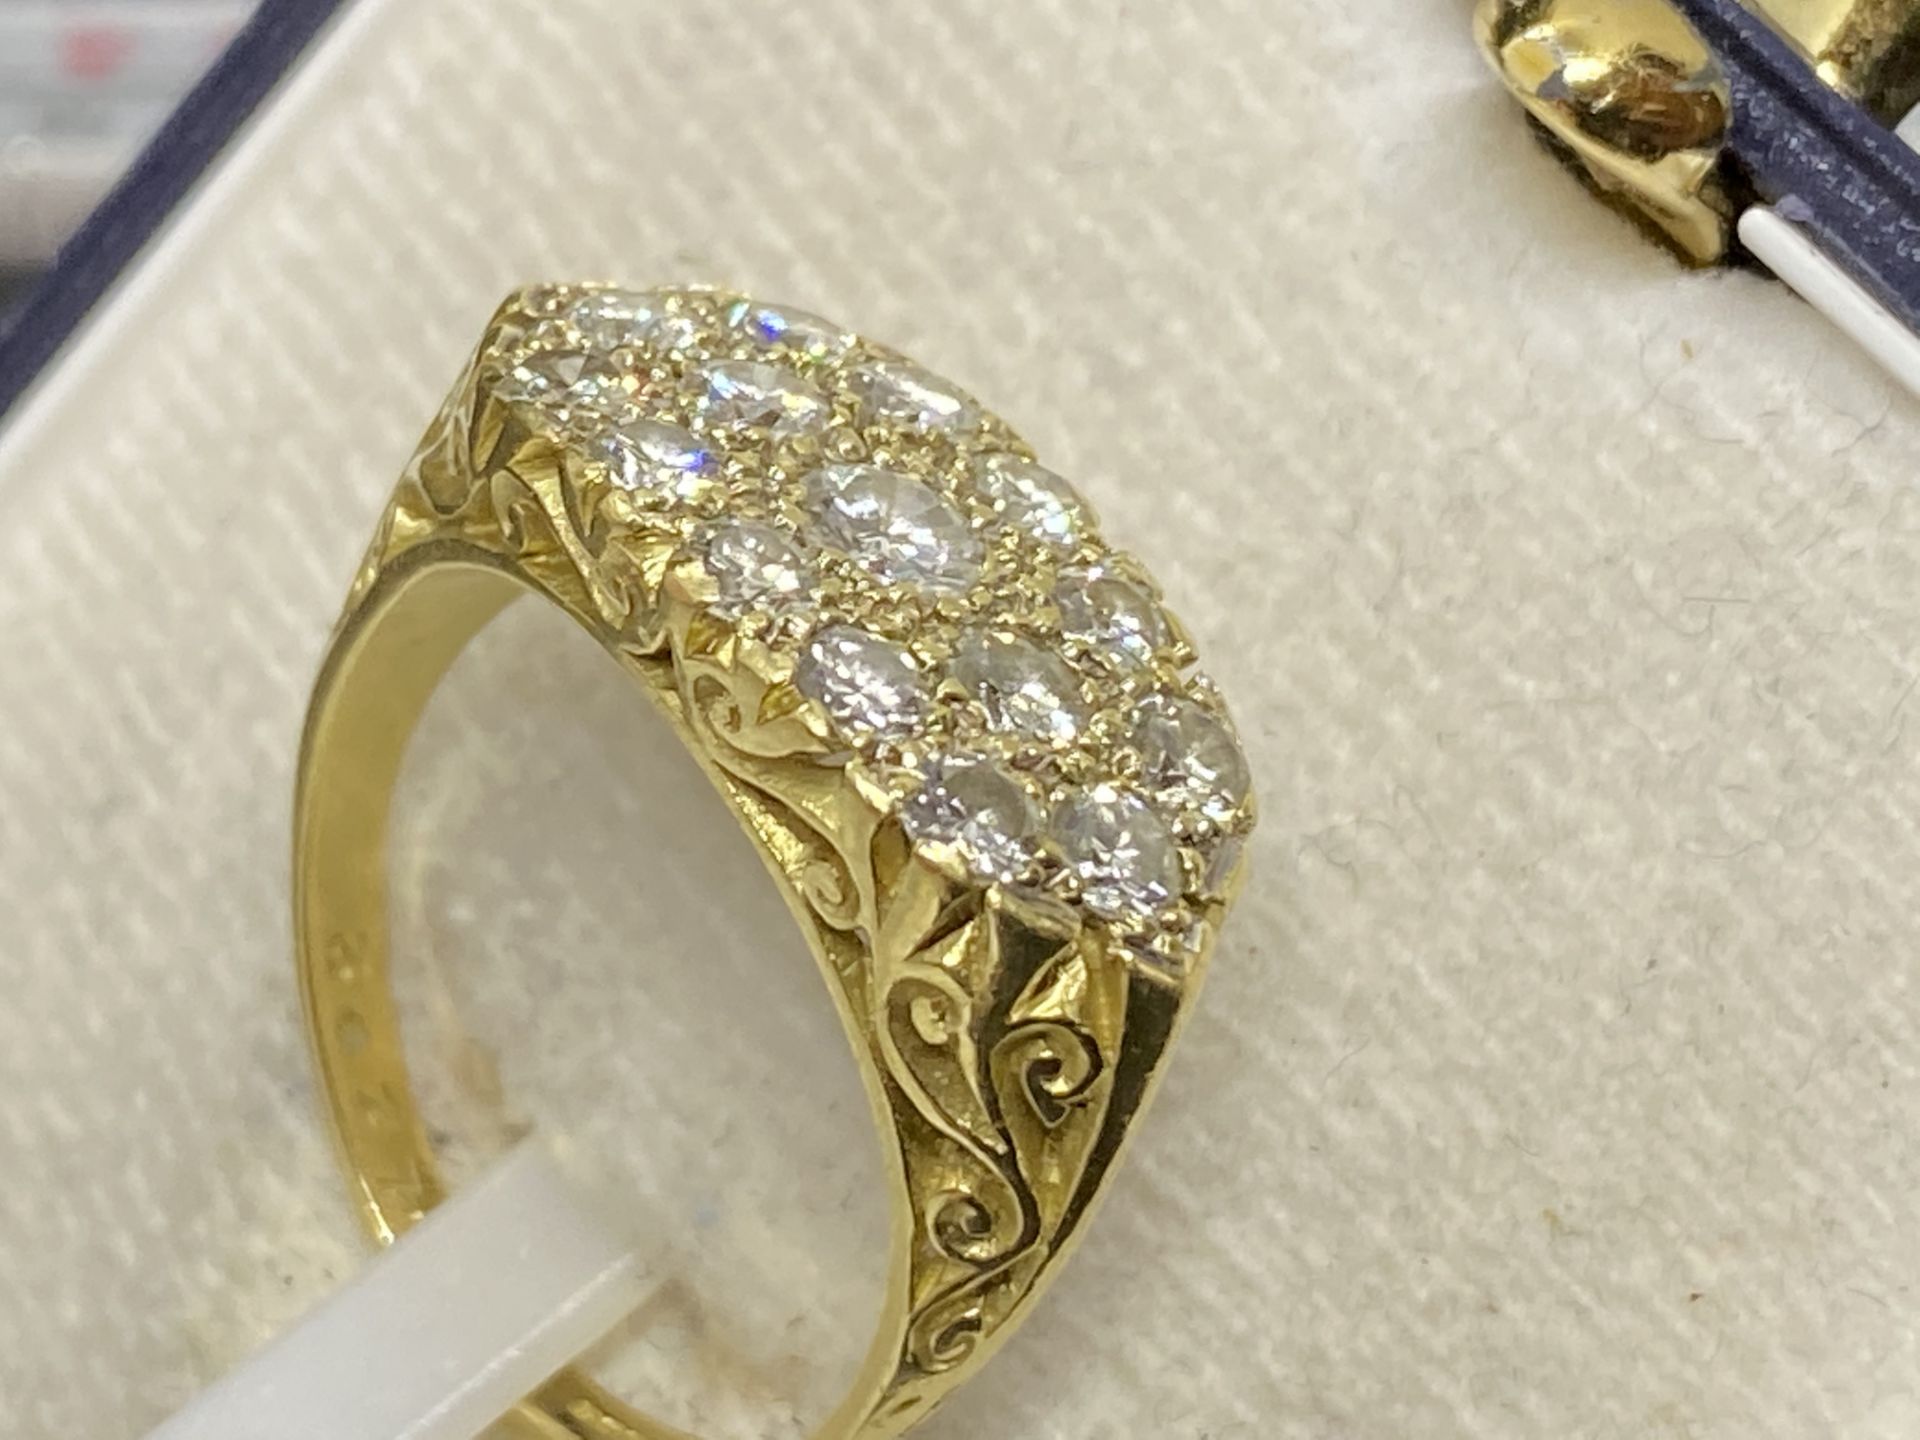 18ct YELLOW GOLD 3.27ct DIAMOND RING WITH 11K INSURANCE VALUATION - Image 3 of 10